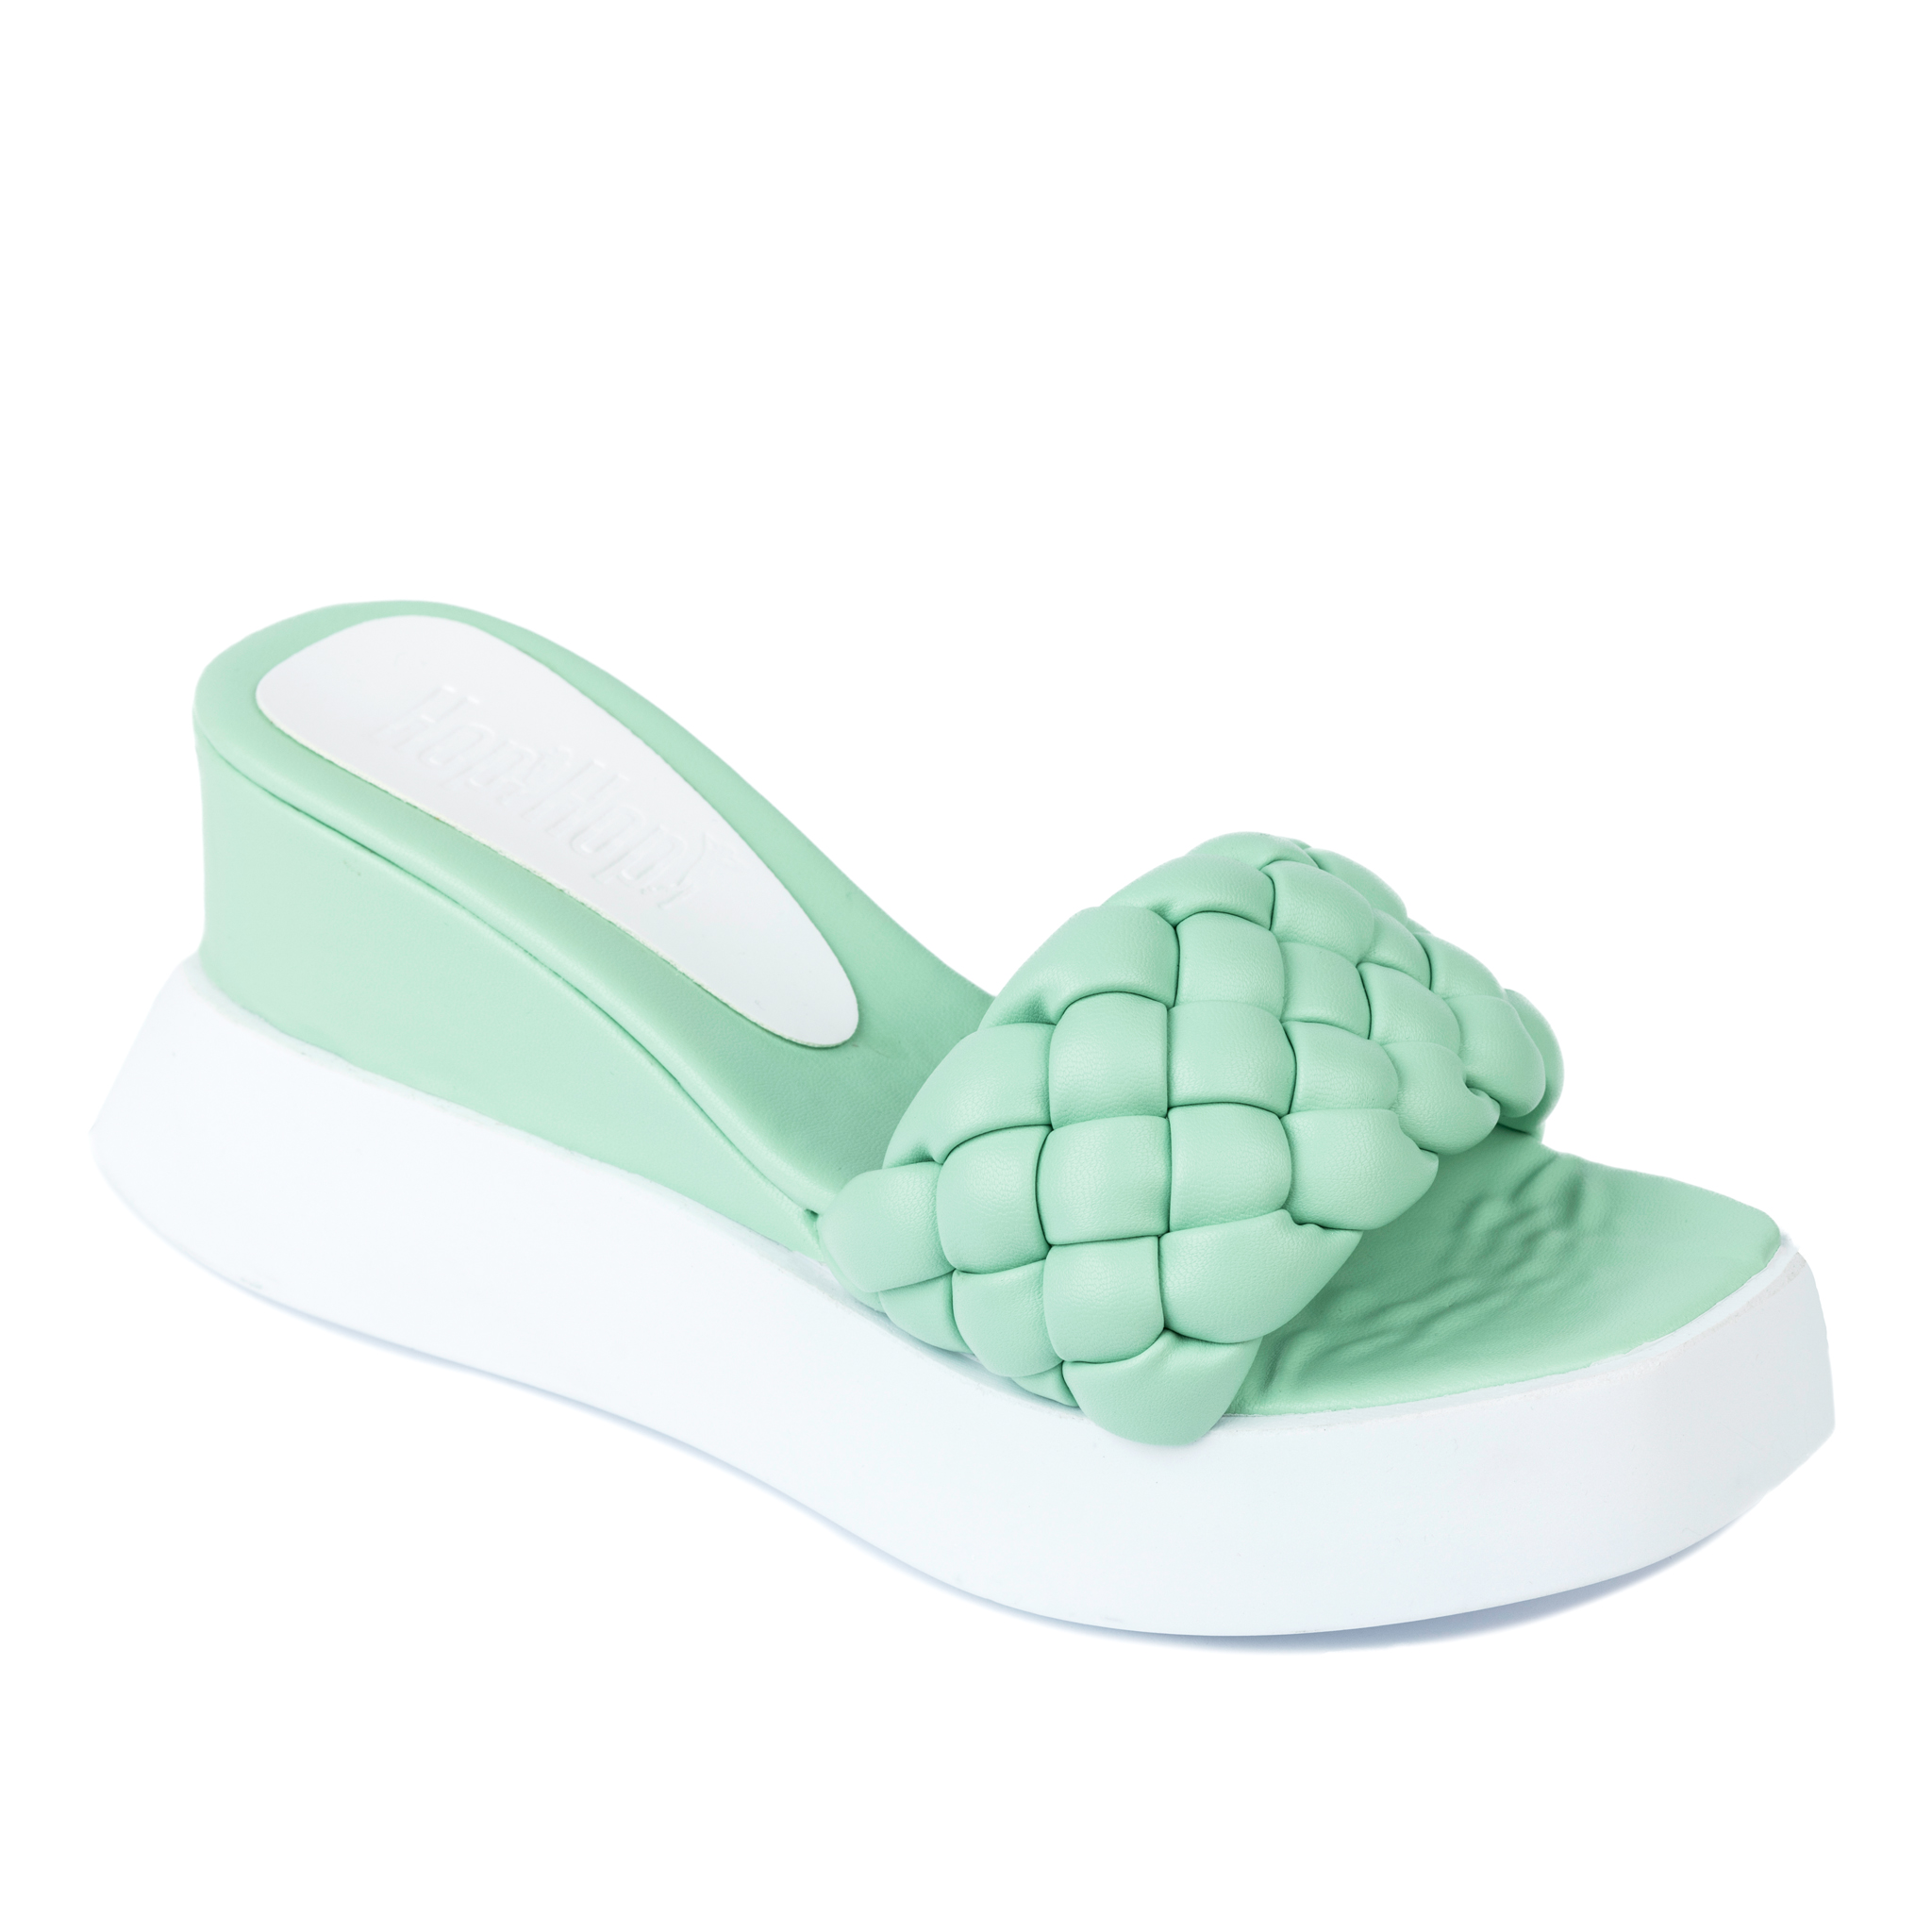 WEDGE KNITTED SLIPPERS - GREEN